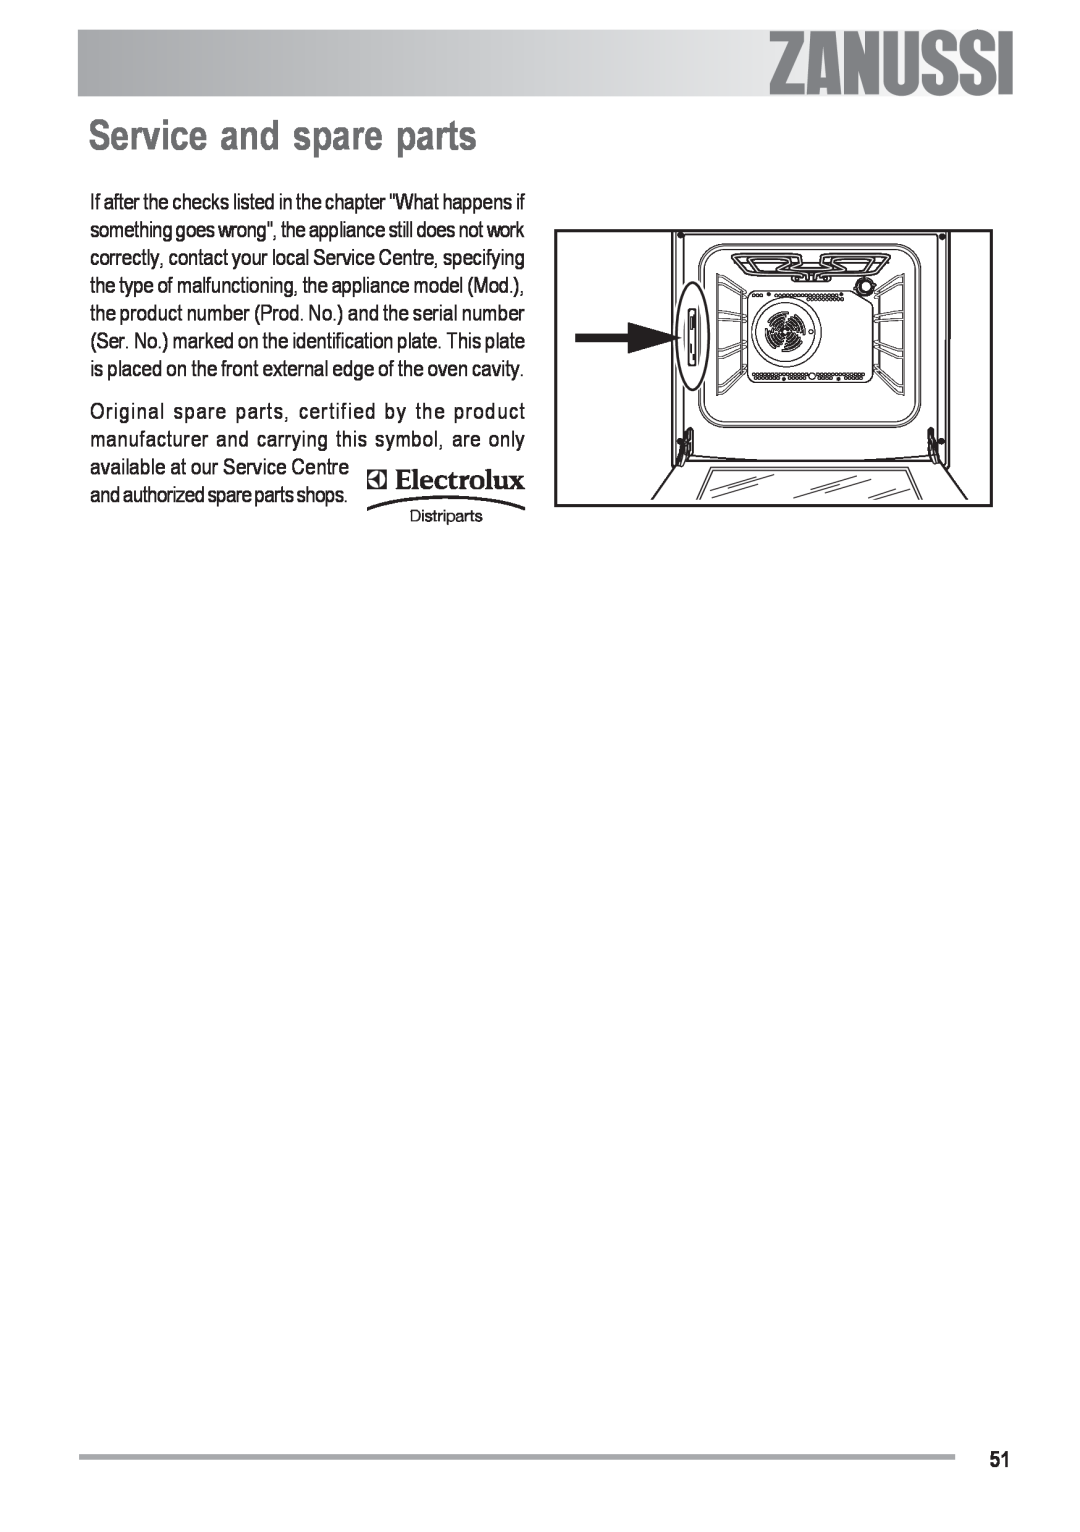 Zanussi ZOU 482 user manual Service and spare parts, and authorized spare parts shops, Electrolux 